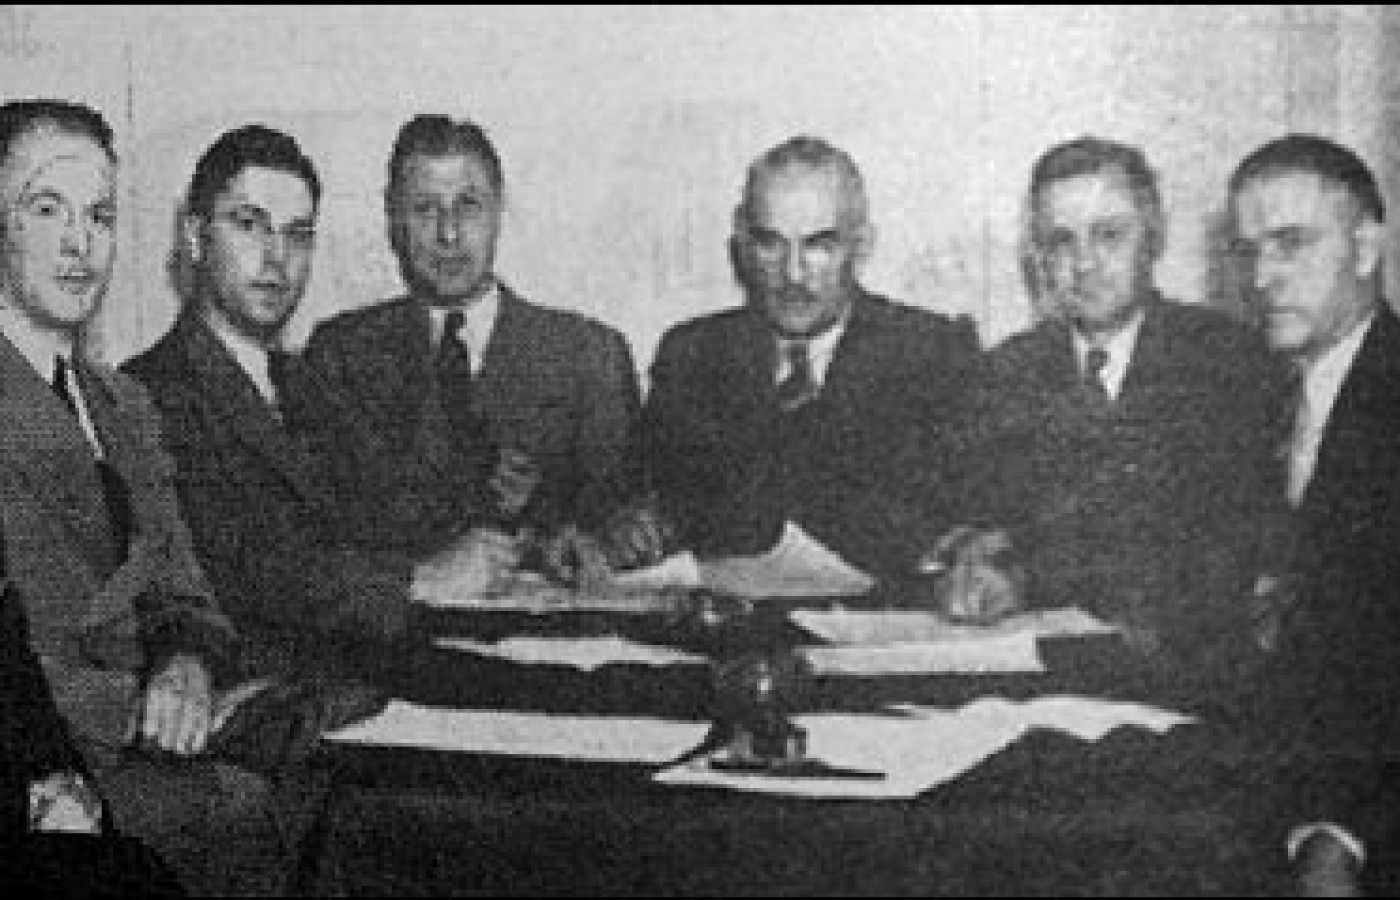 Doctors in Dominion Chiropractic Council in 1943